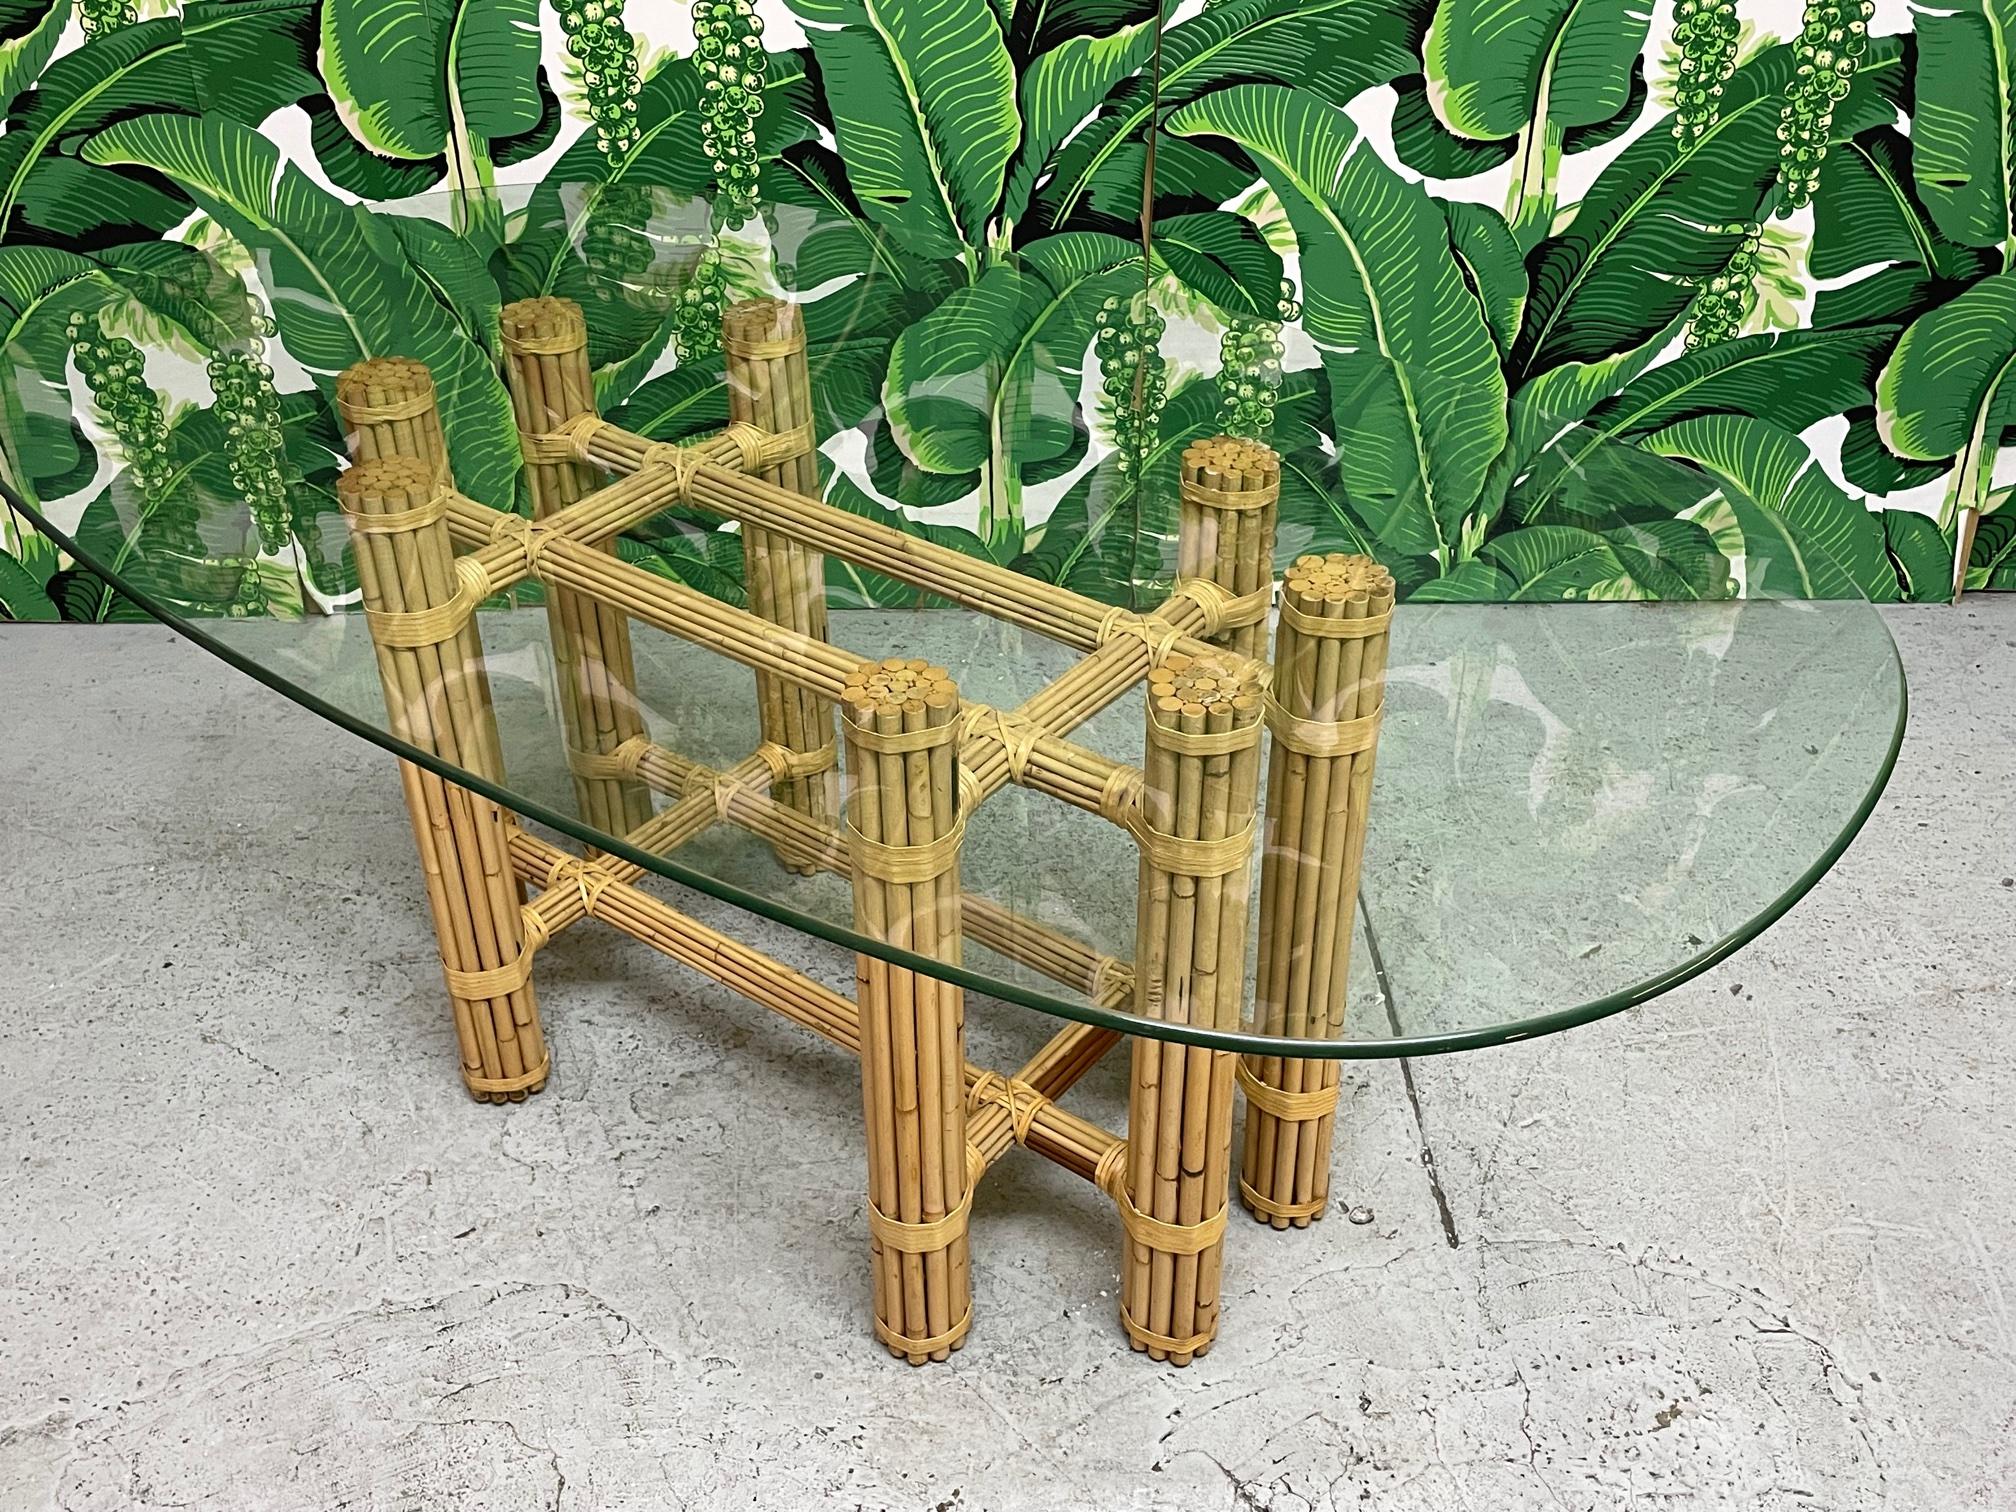 Bamboo rattan glass top dining table in the style of McGuire. Simple and elegant organic modern style. Rattan poles lashed together with leather rawhide laces. Glass top is 5/8